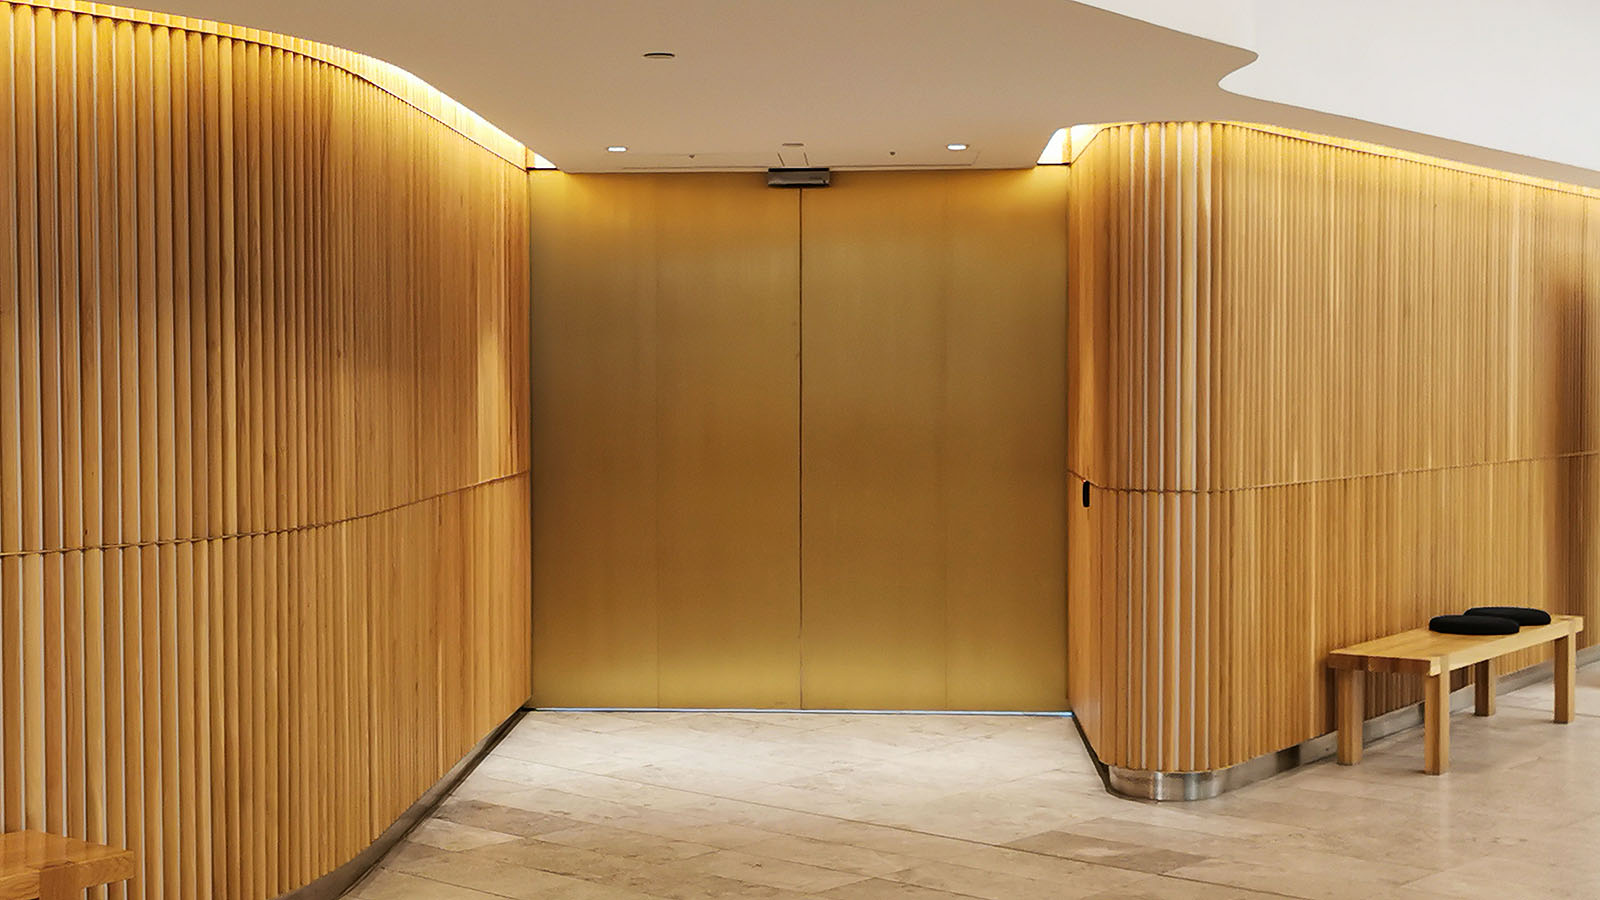 Entrance to the Qantas Chairman's Lounge in Brisbane